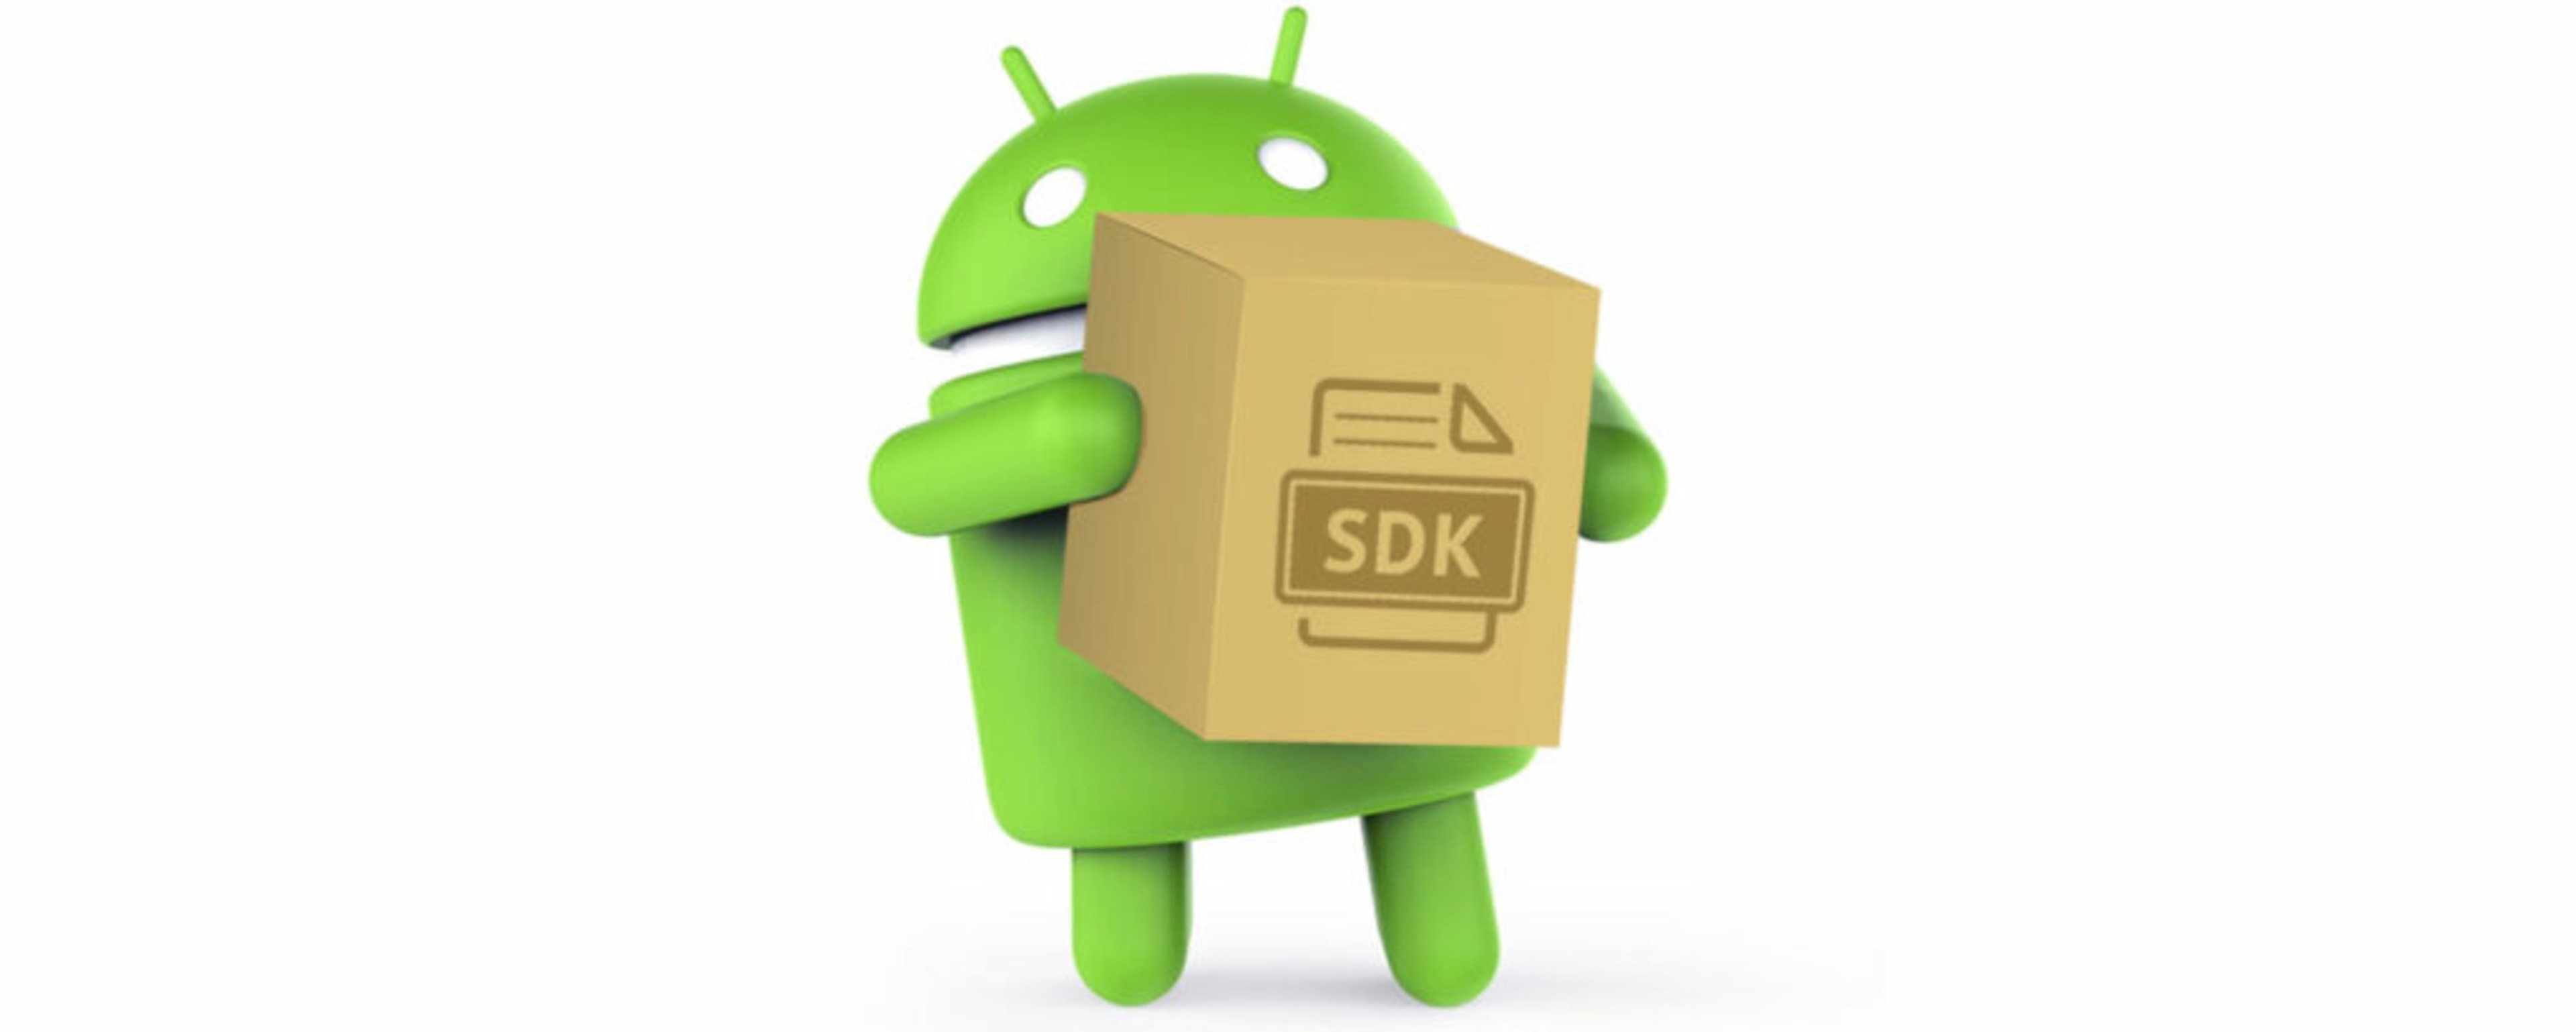 Android logo with SDK box, symbolizing code reuse and easy integration in Android Studio